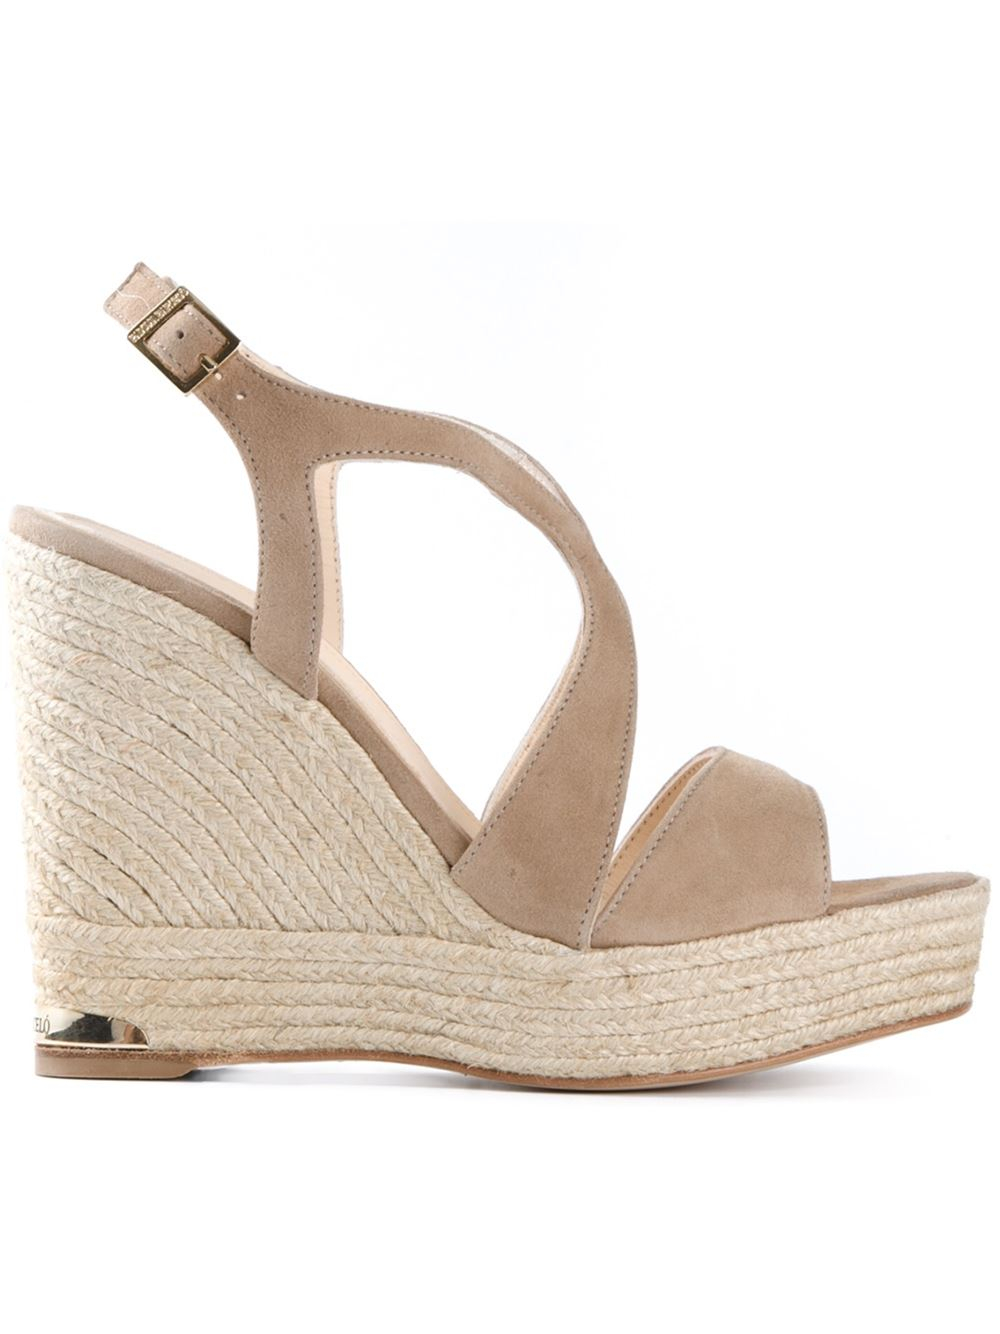 Paloma barceló Buckled Wedge Sandals in Beige (nude & neutrals) | Lyst